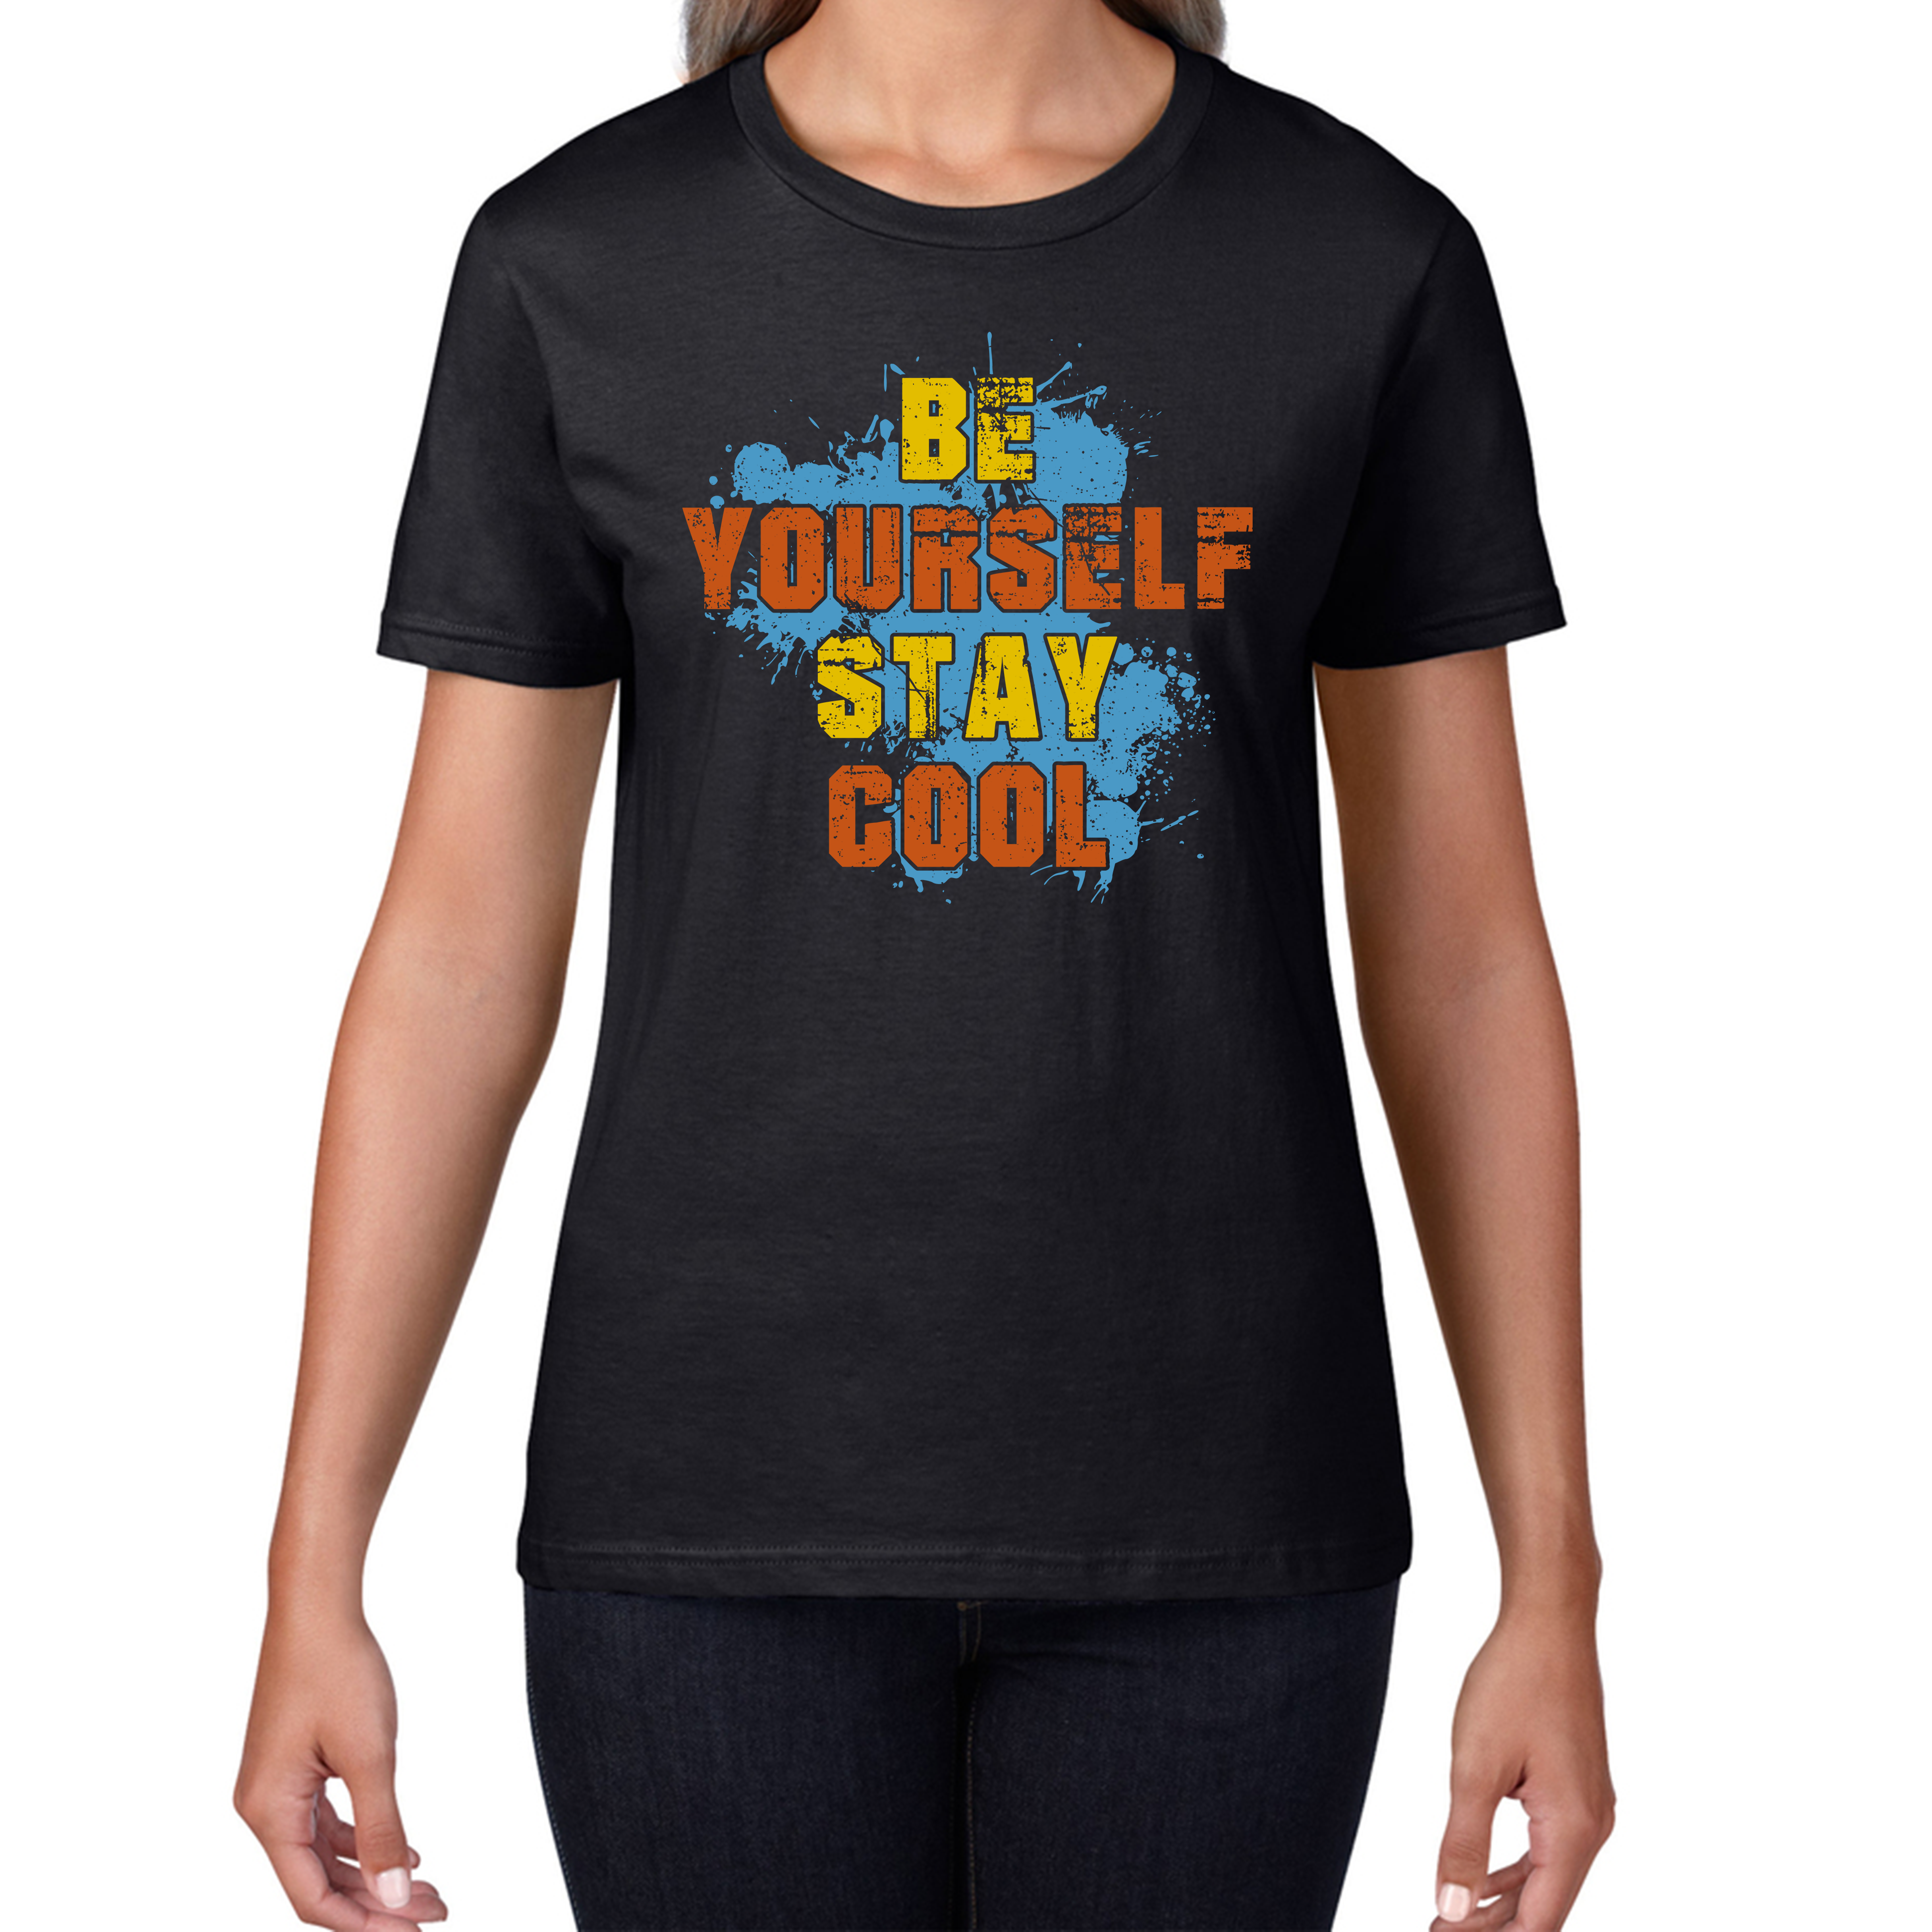 Be Yourself Stay Cool T-shirt Inspirational Motivational Quote Womens Tee Top